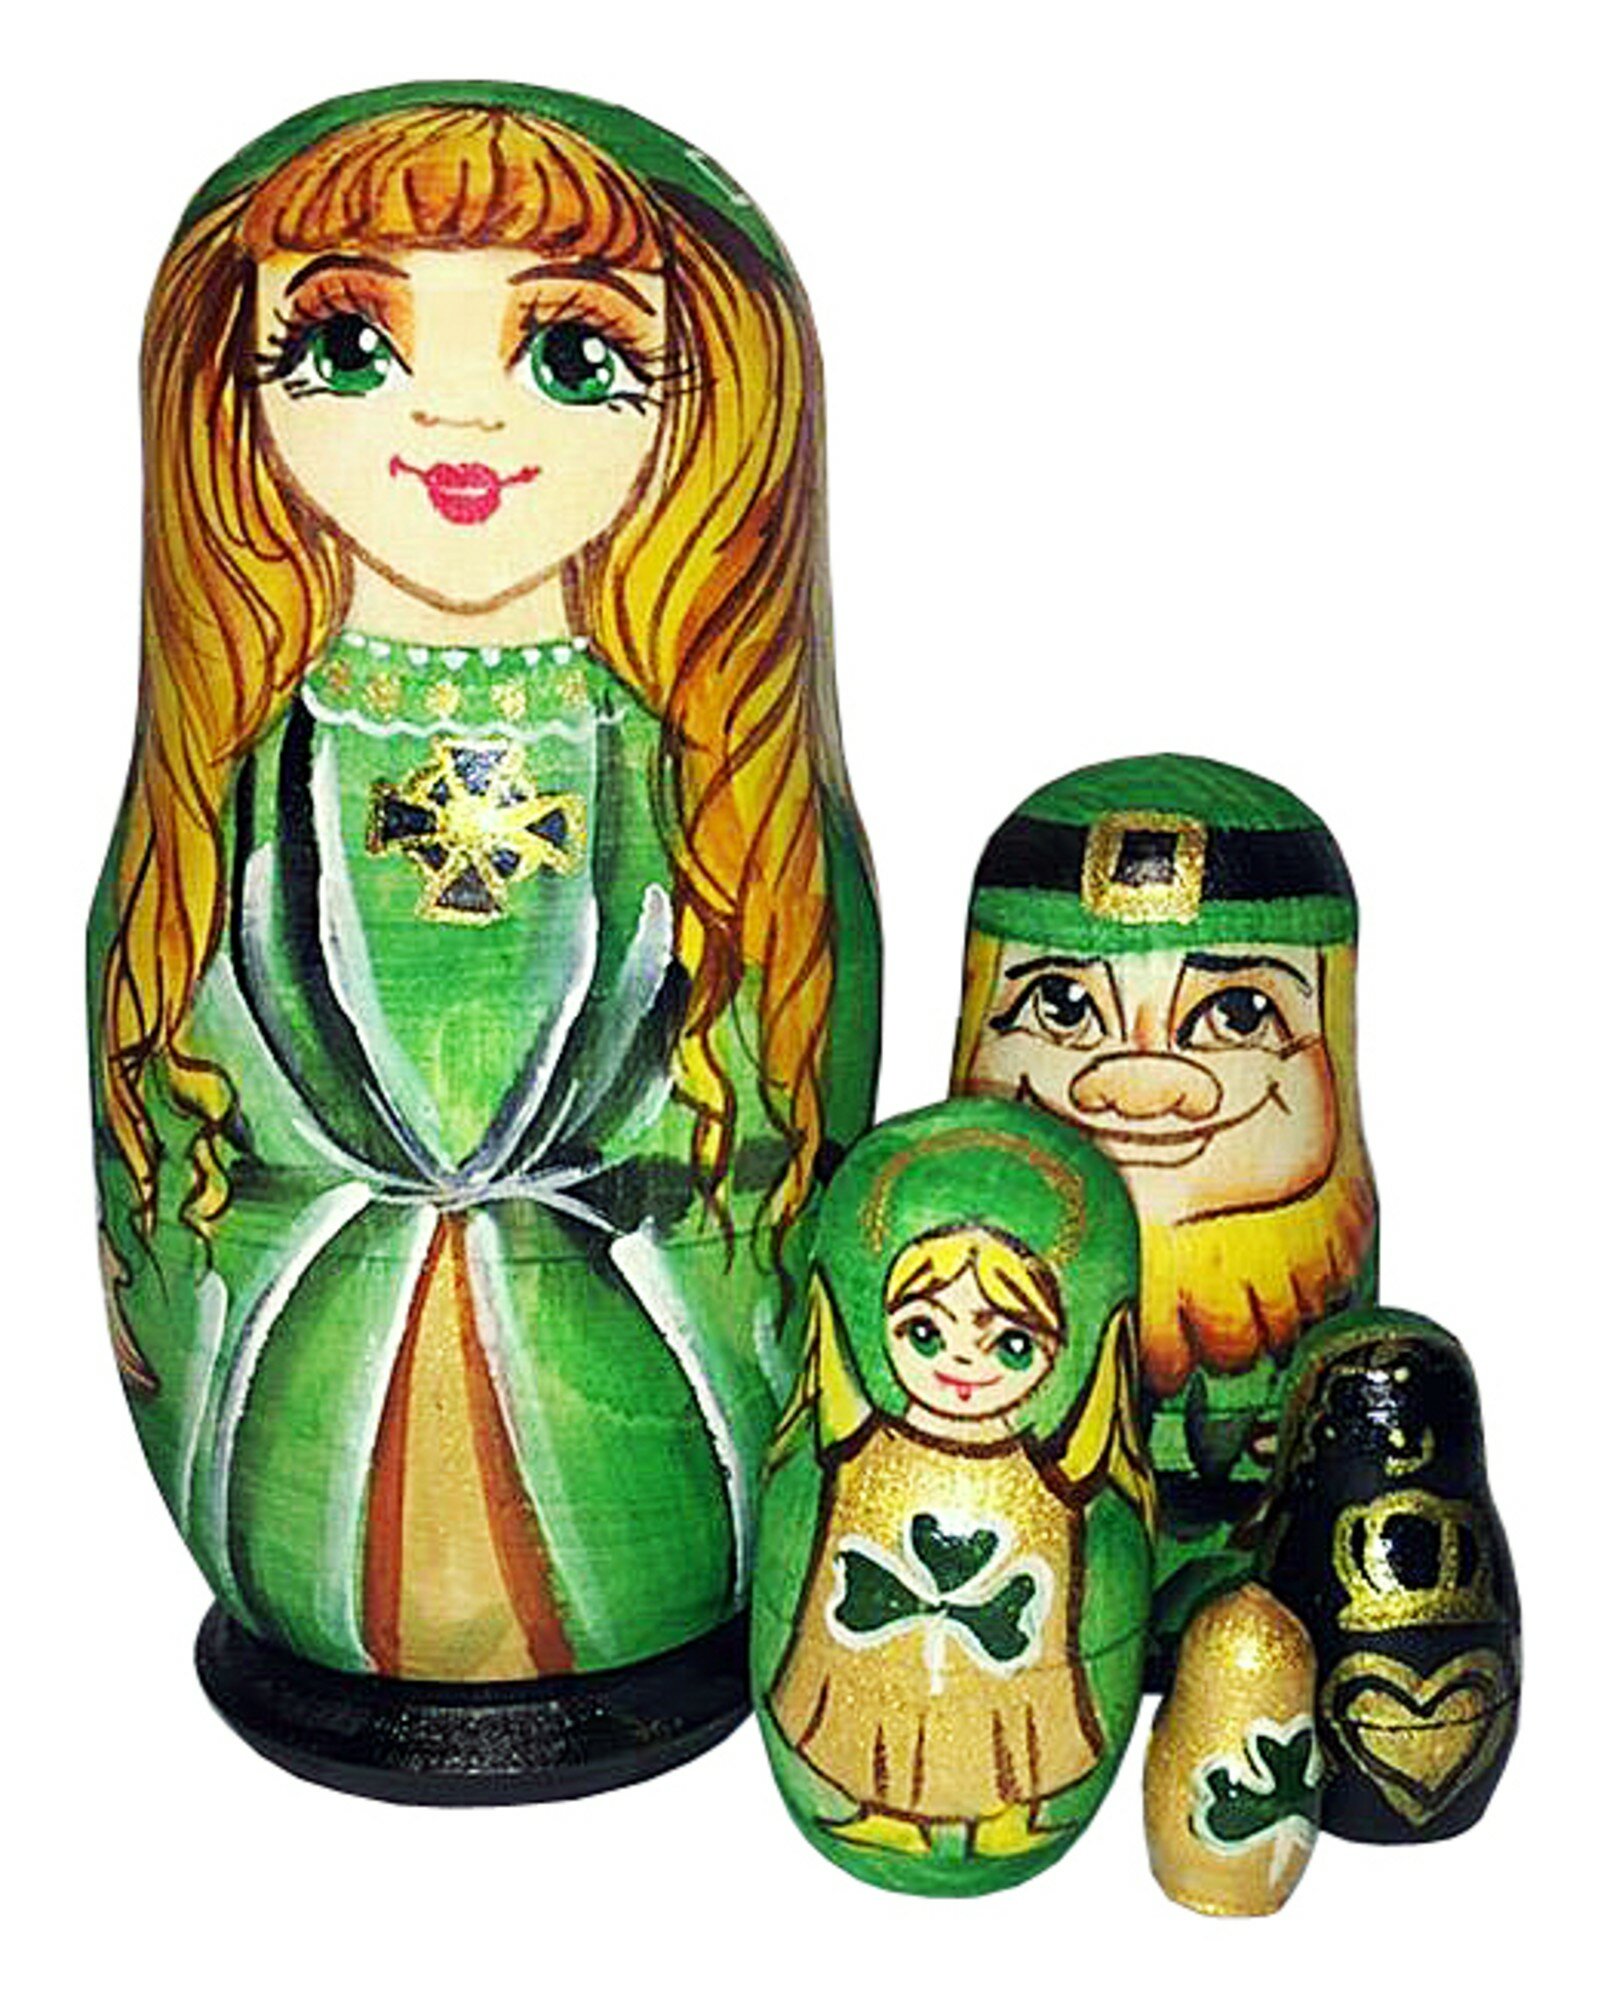 the nesting doll